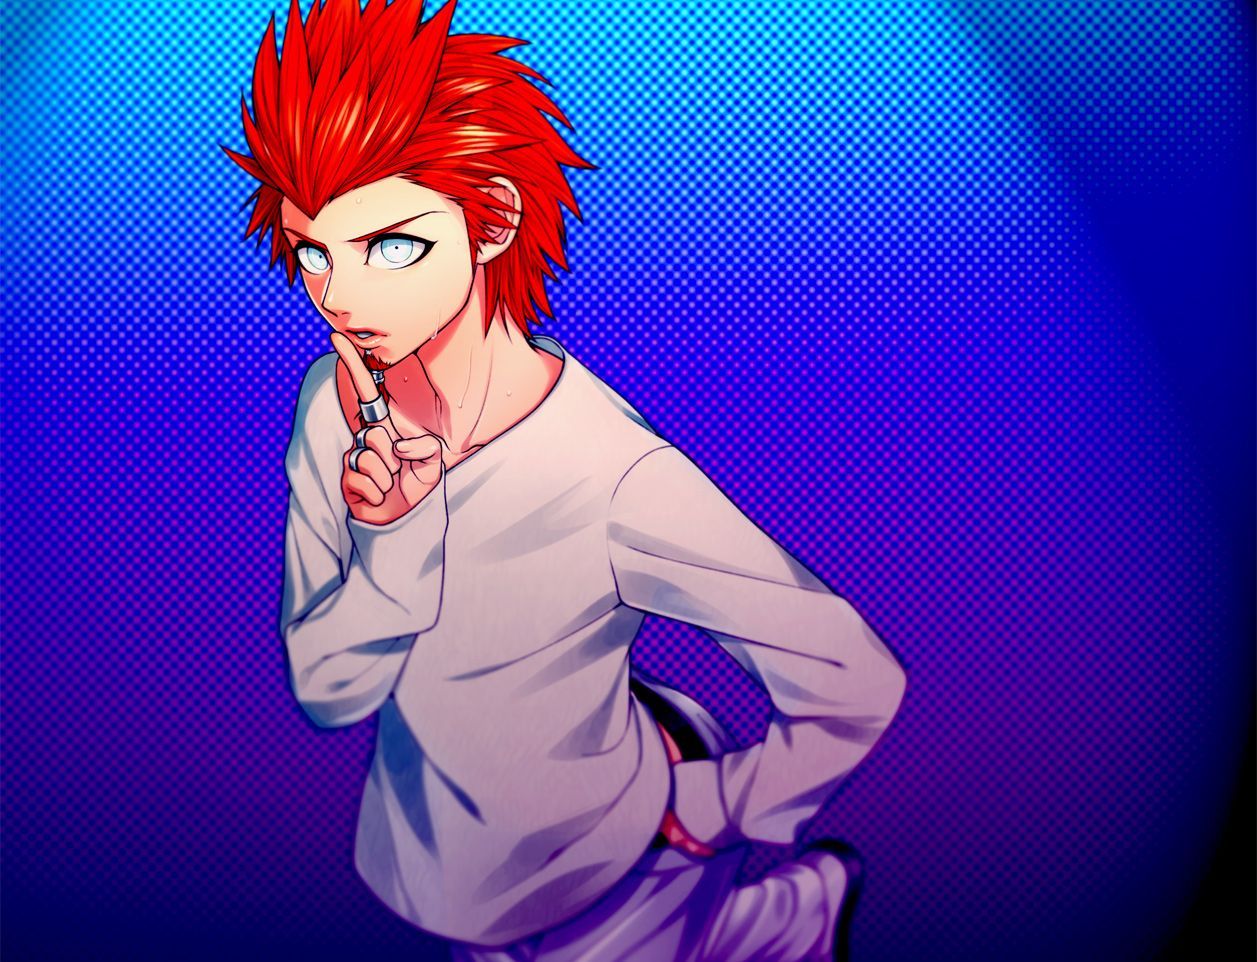 Leon Kuwata Wallpaper / Leon Kuwata Wallpapers Wallpaper Cave - The game was scrapped because the themes.